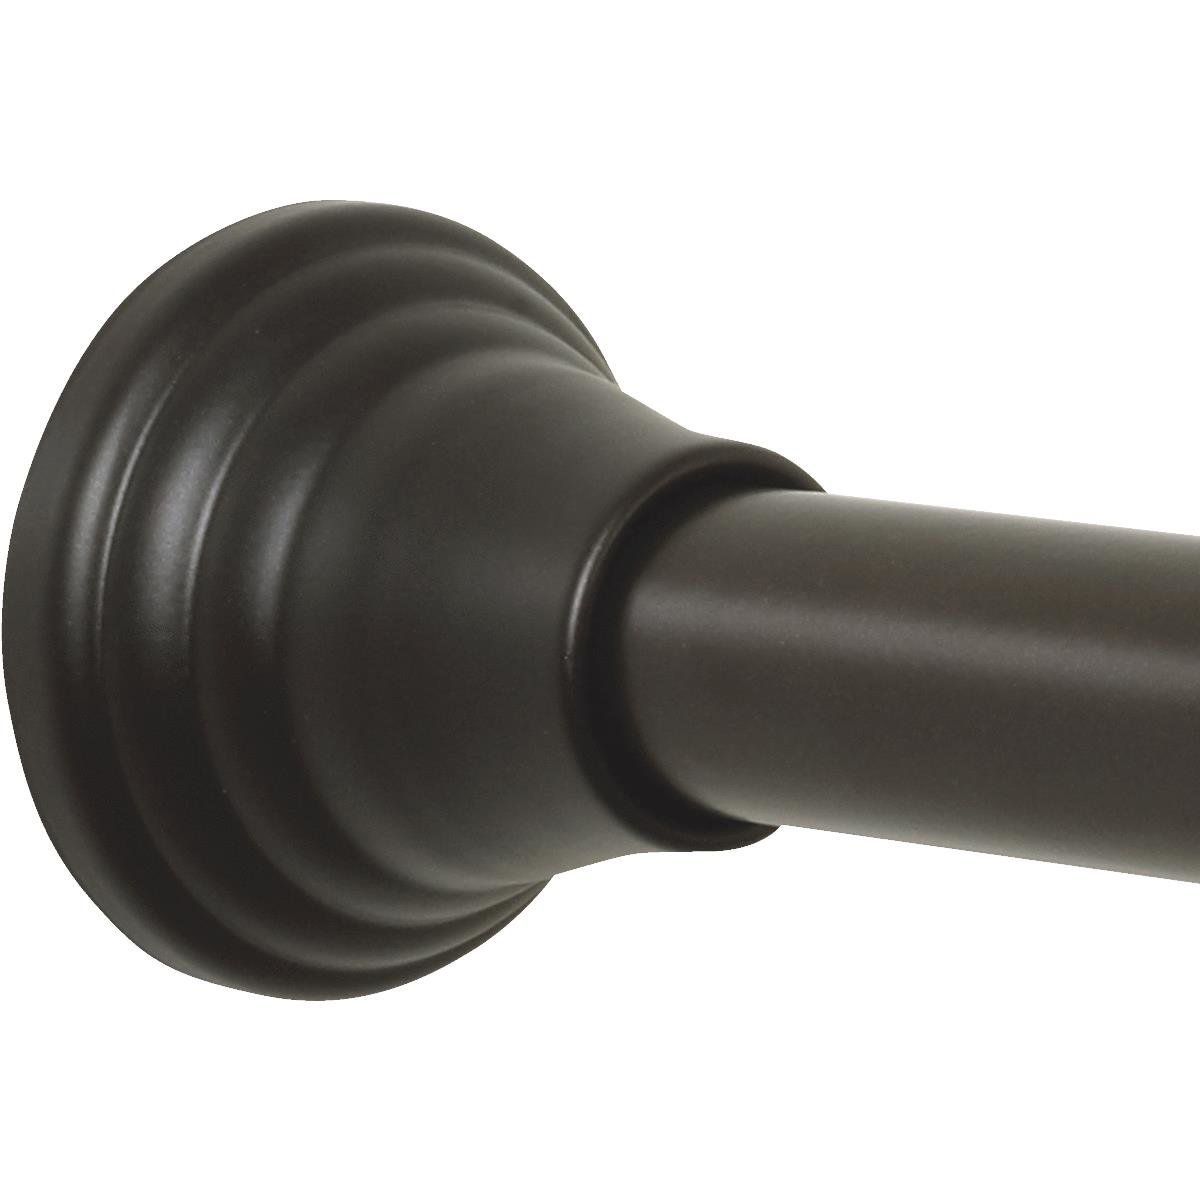 72" Adjustable Tension Finial Shower Rod in Oil Rubbed Bronze